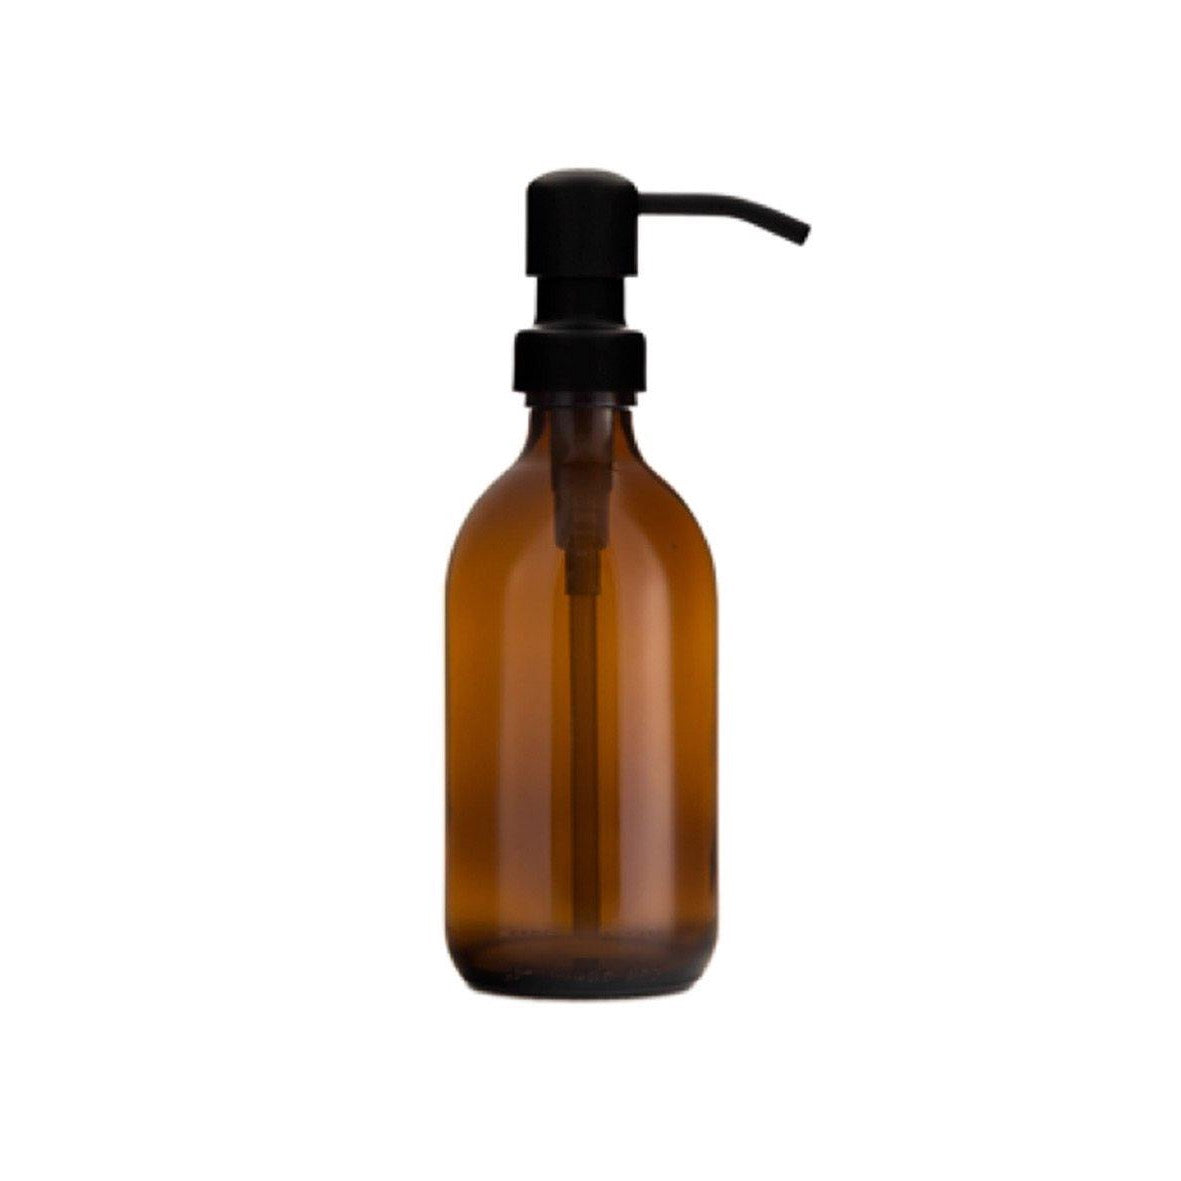 Kuishi Amber Glass Soap Dispenser with Stainless Steel Pump Black